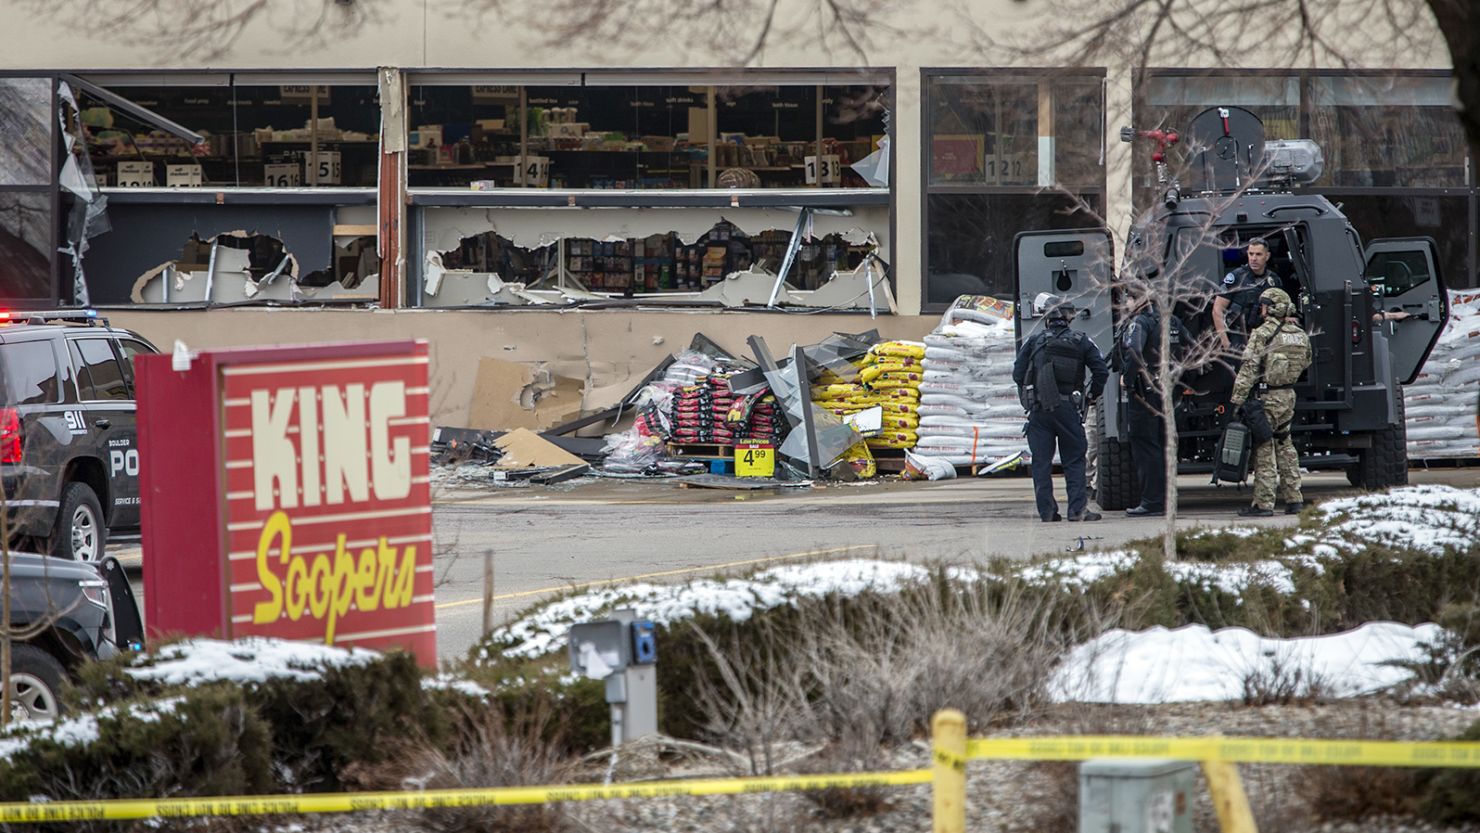 Authorities respond to a King Soopers grocery store after a shooting on March 22, 2021 in Boulder, Colorado, left 10 people dead.